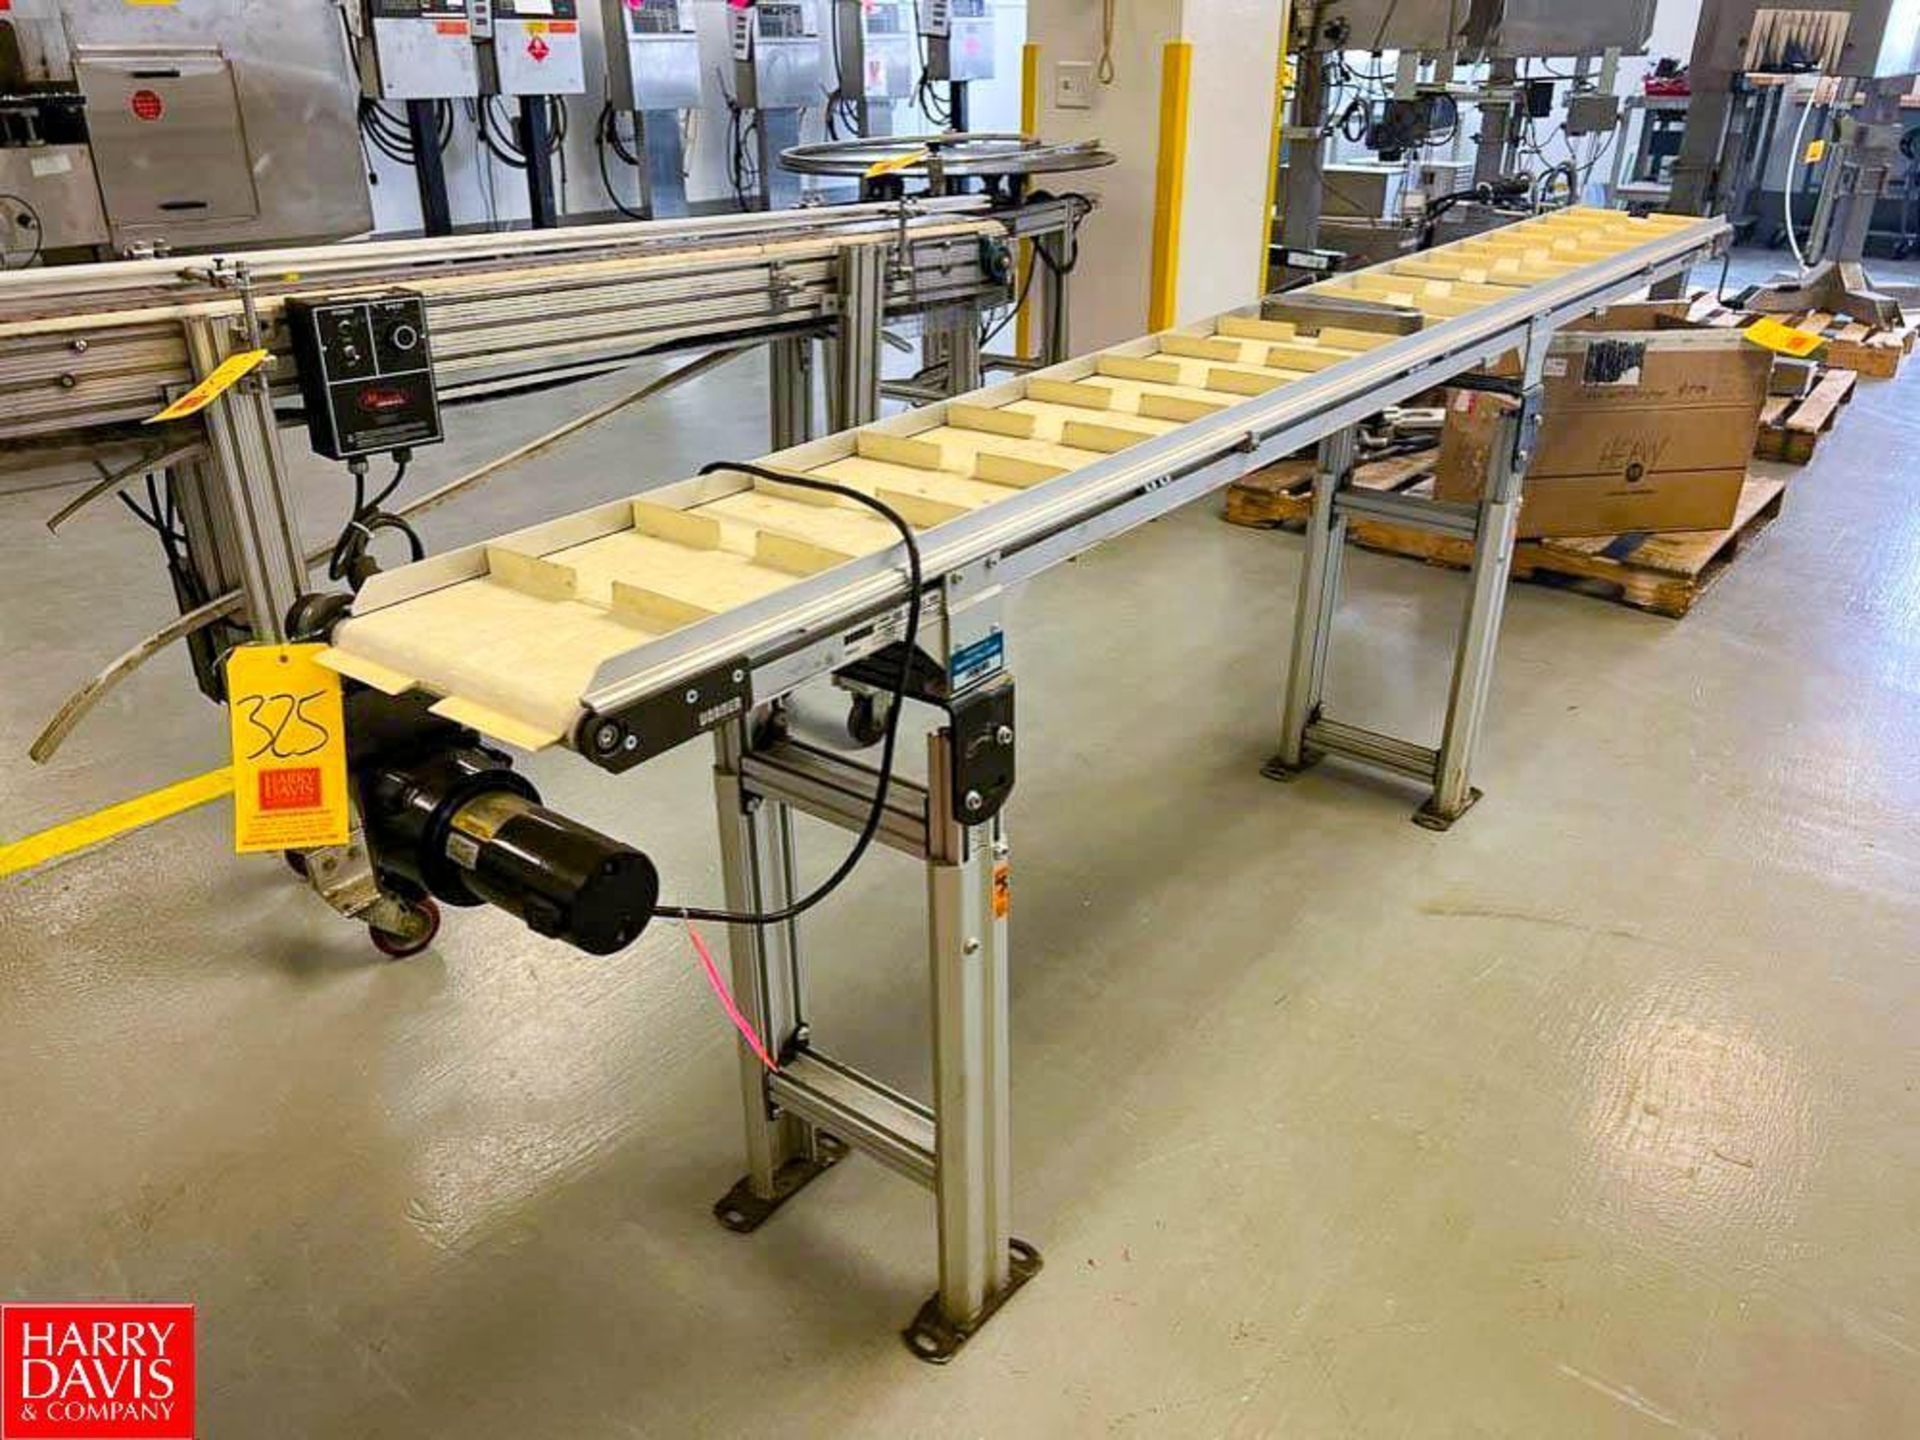 Dorner 2200 Series Paddle Belt Conveyor with Drive, Dimensions = 10' x 11" - Rigging Fee: $300